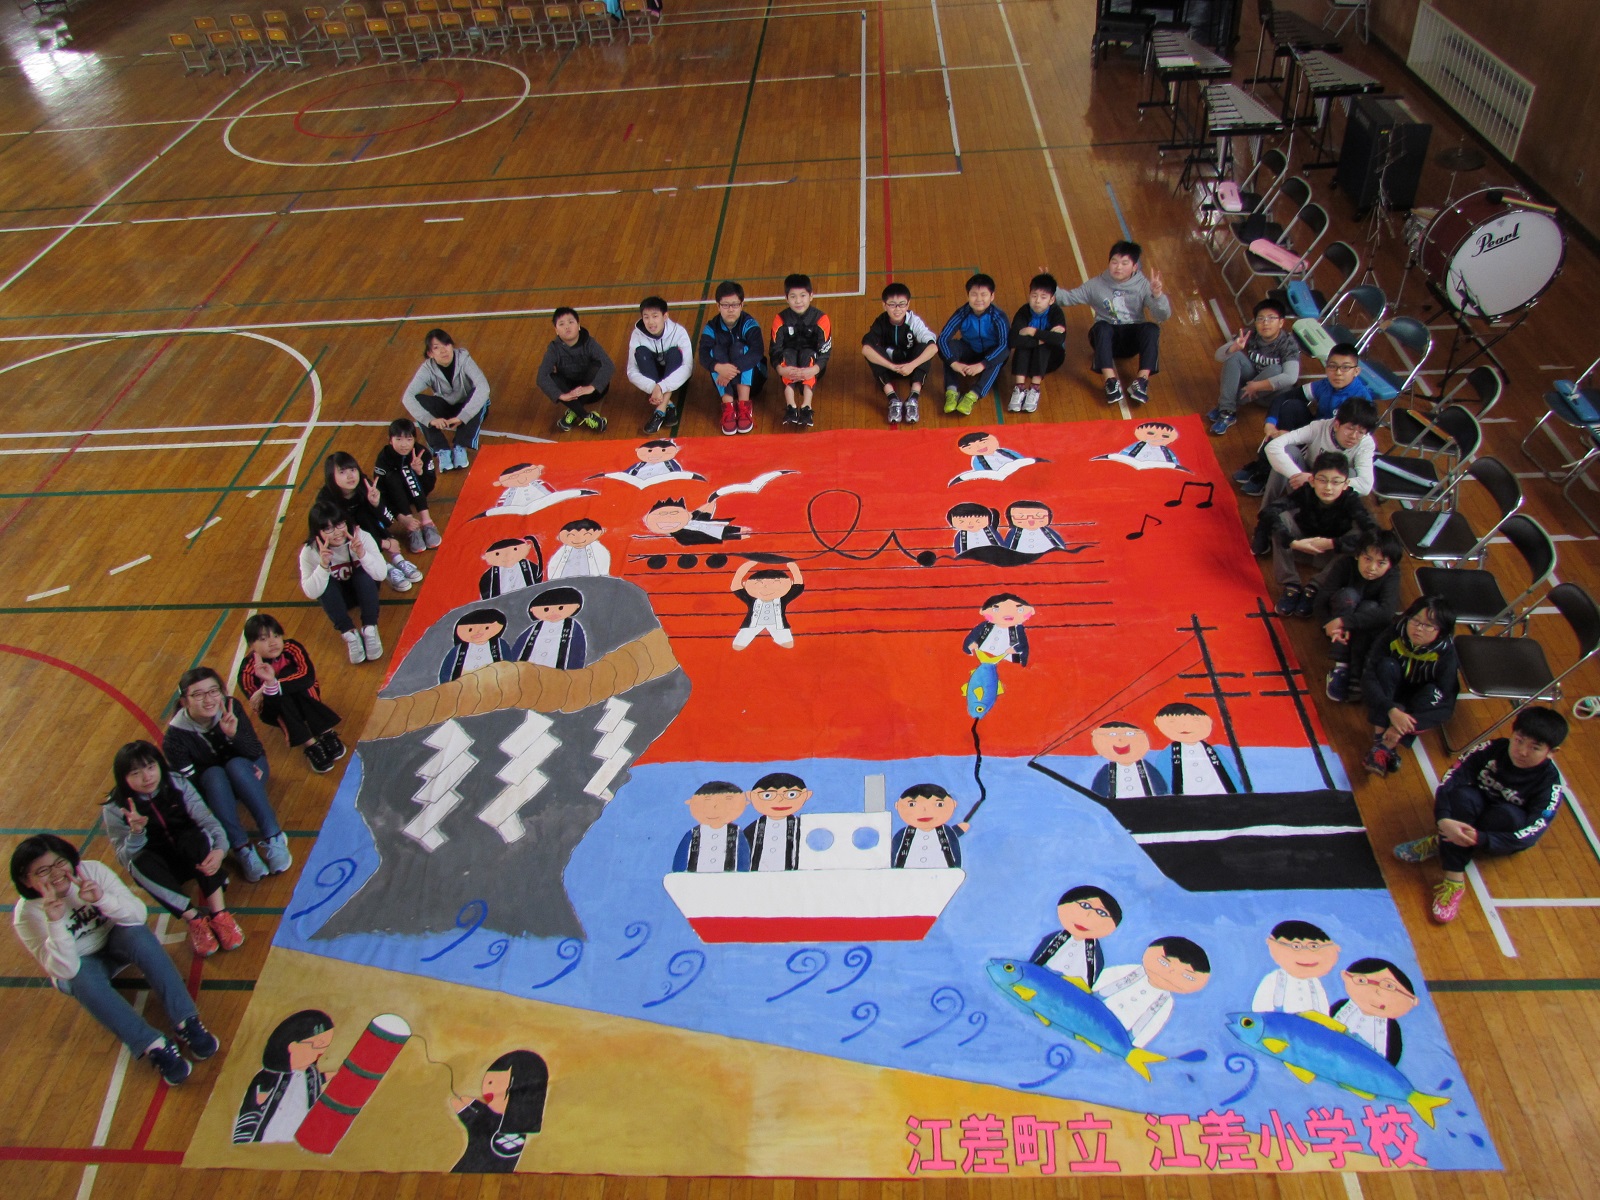 The Biggest Painting in the World 2020 Esashi town was completed